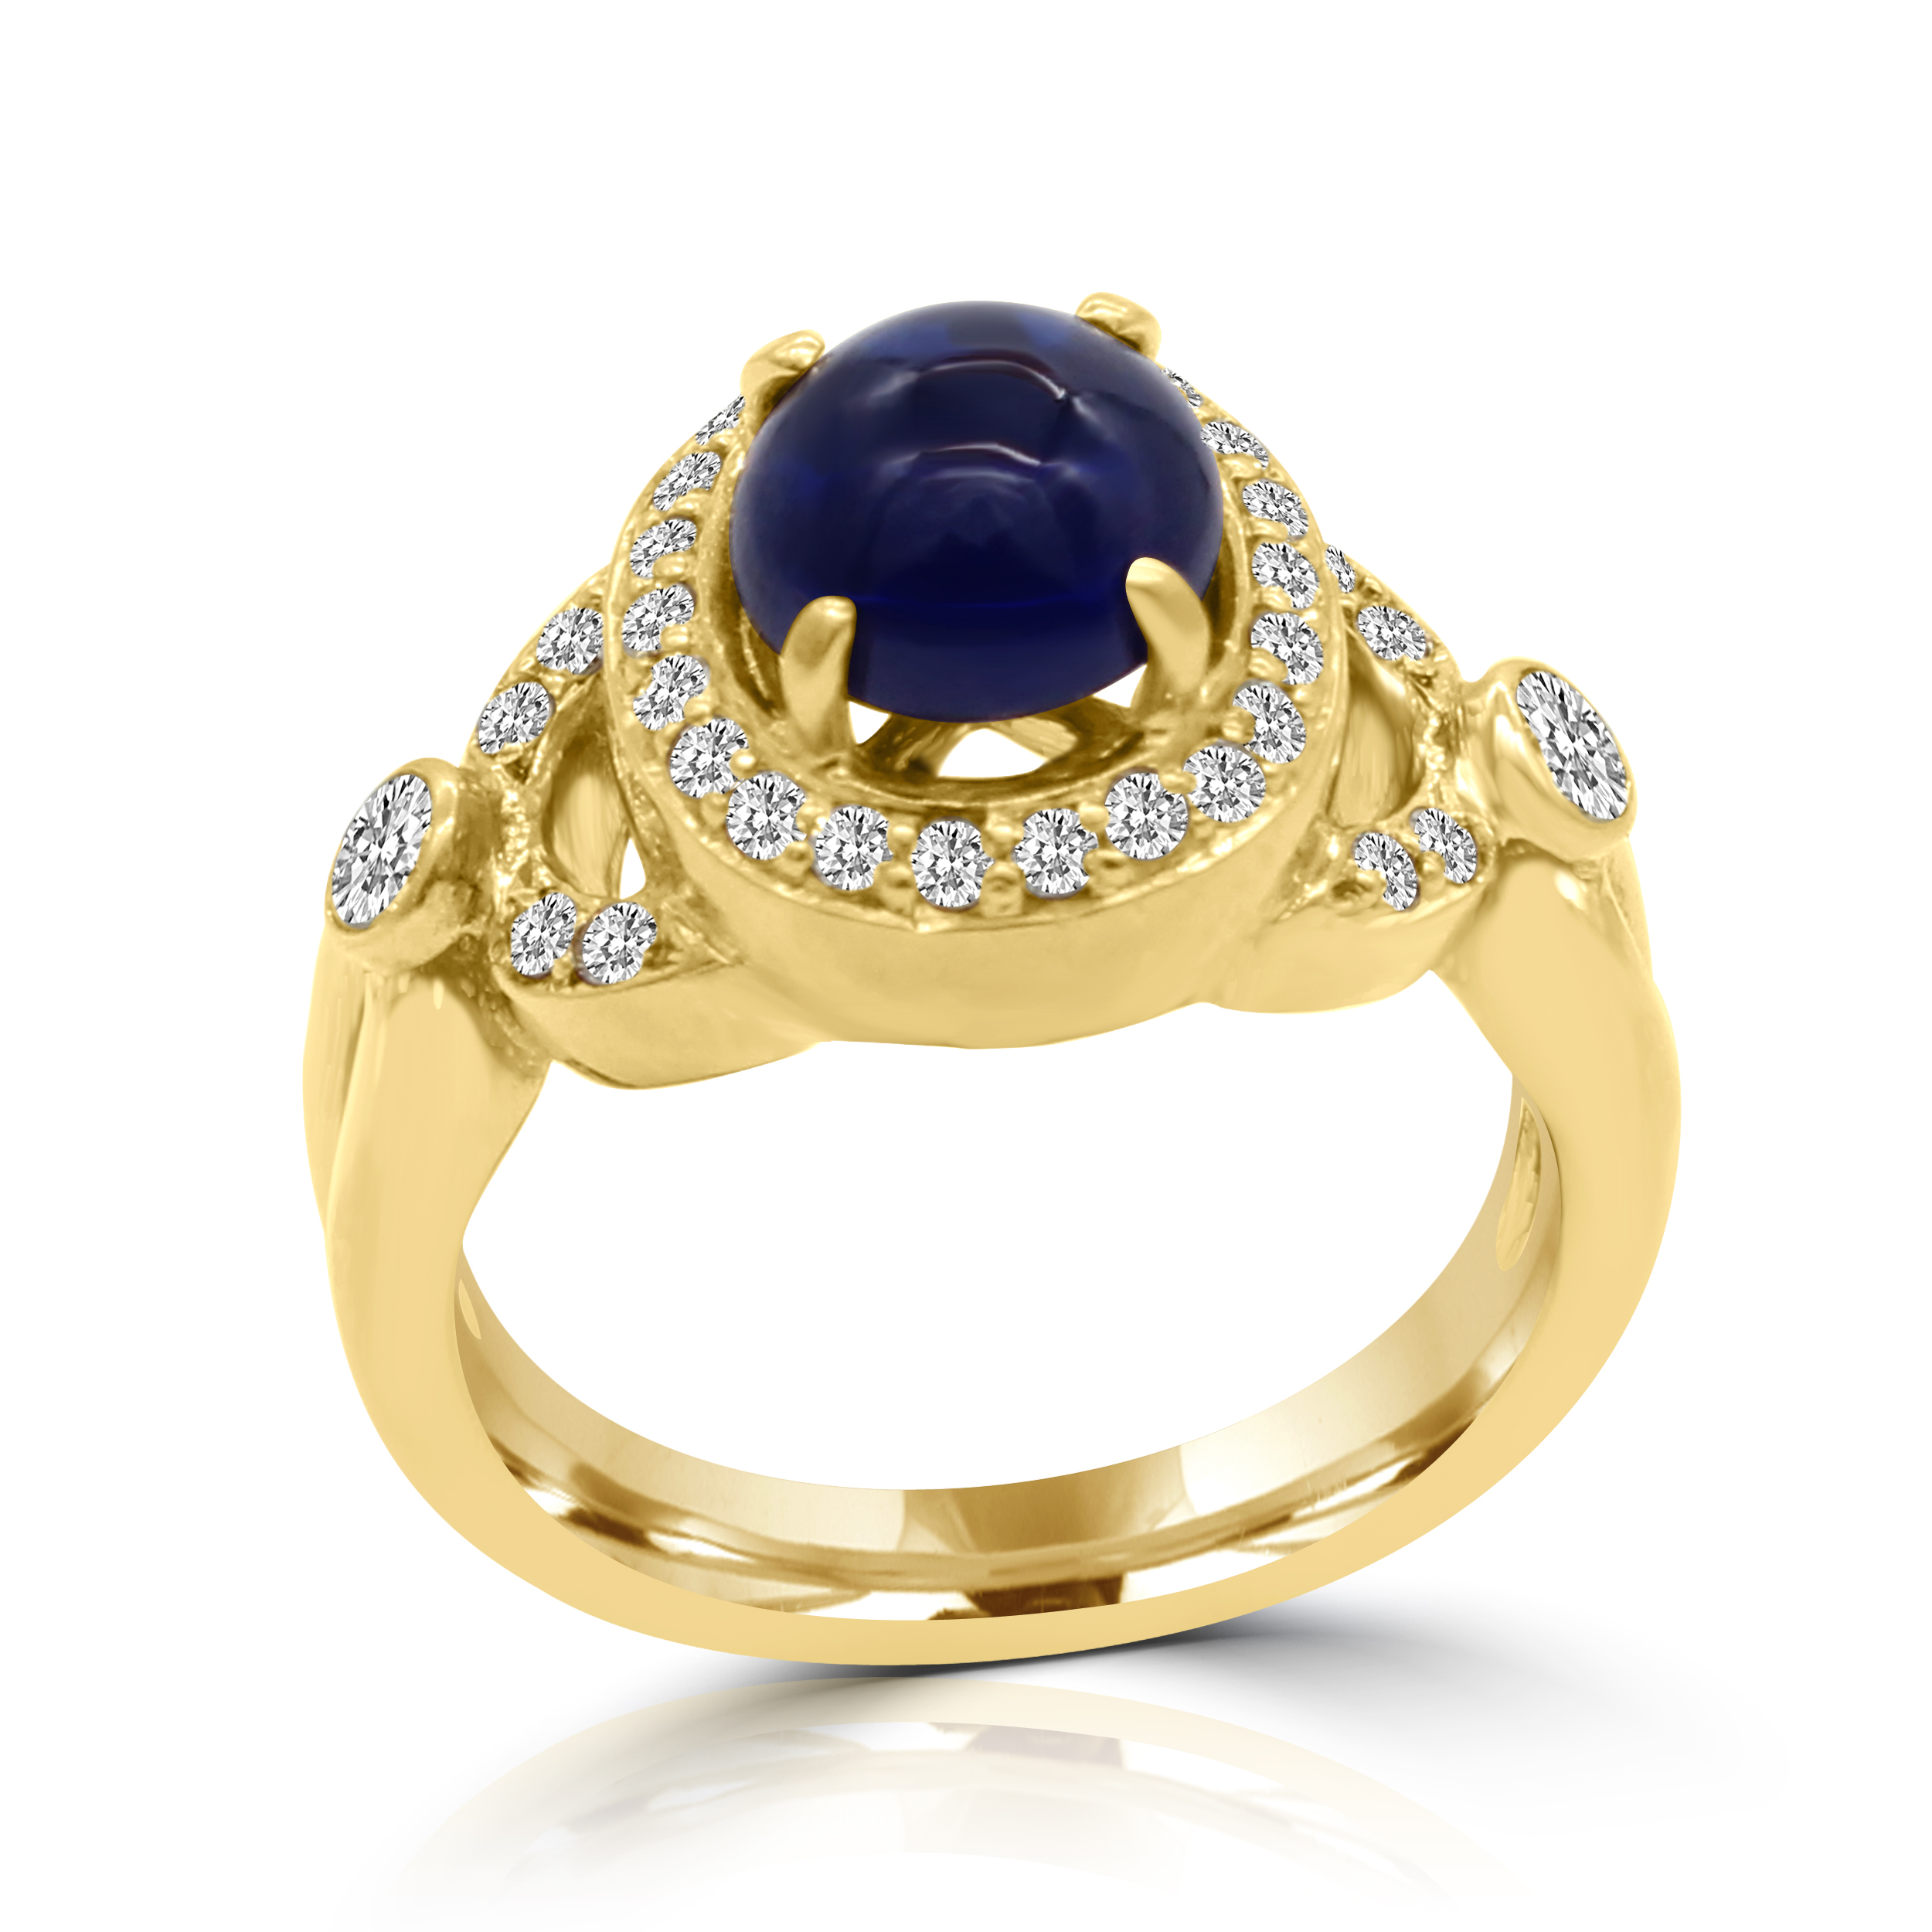 Blue Cabochon Sapphire Ring by Elizabeth Eliner eDiamonds and Design. Blue Sapphire, Diamonds, and 18K Yellow Gold